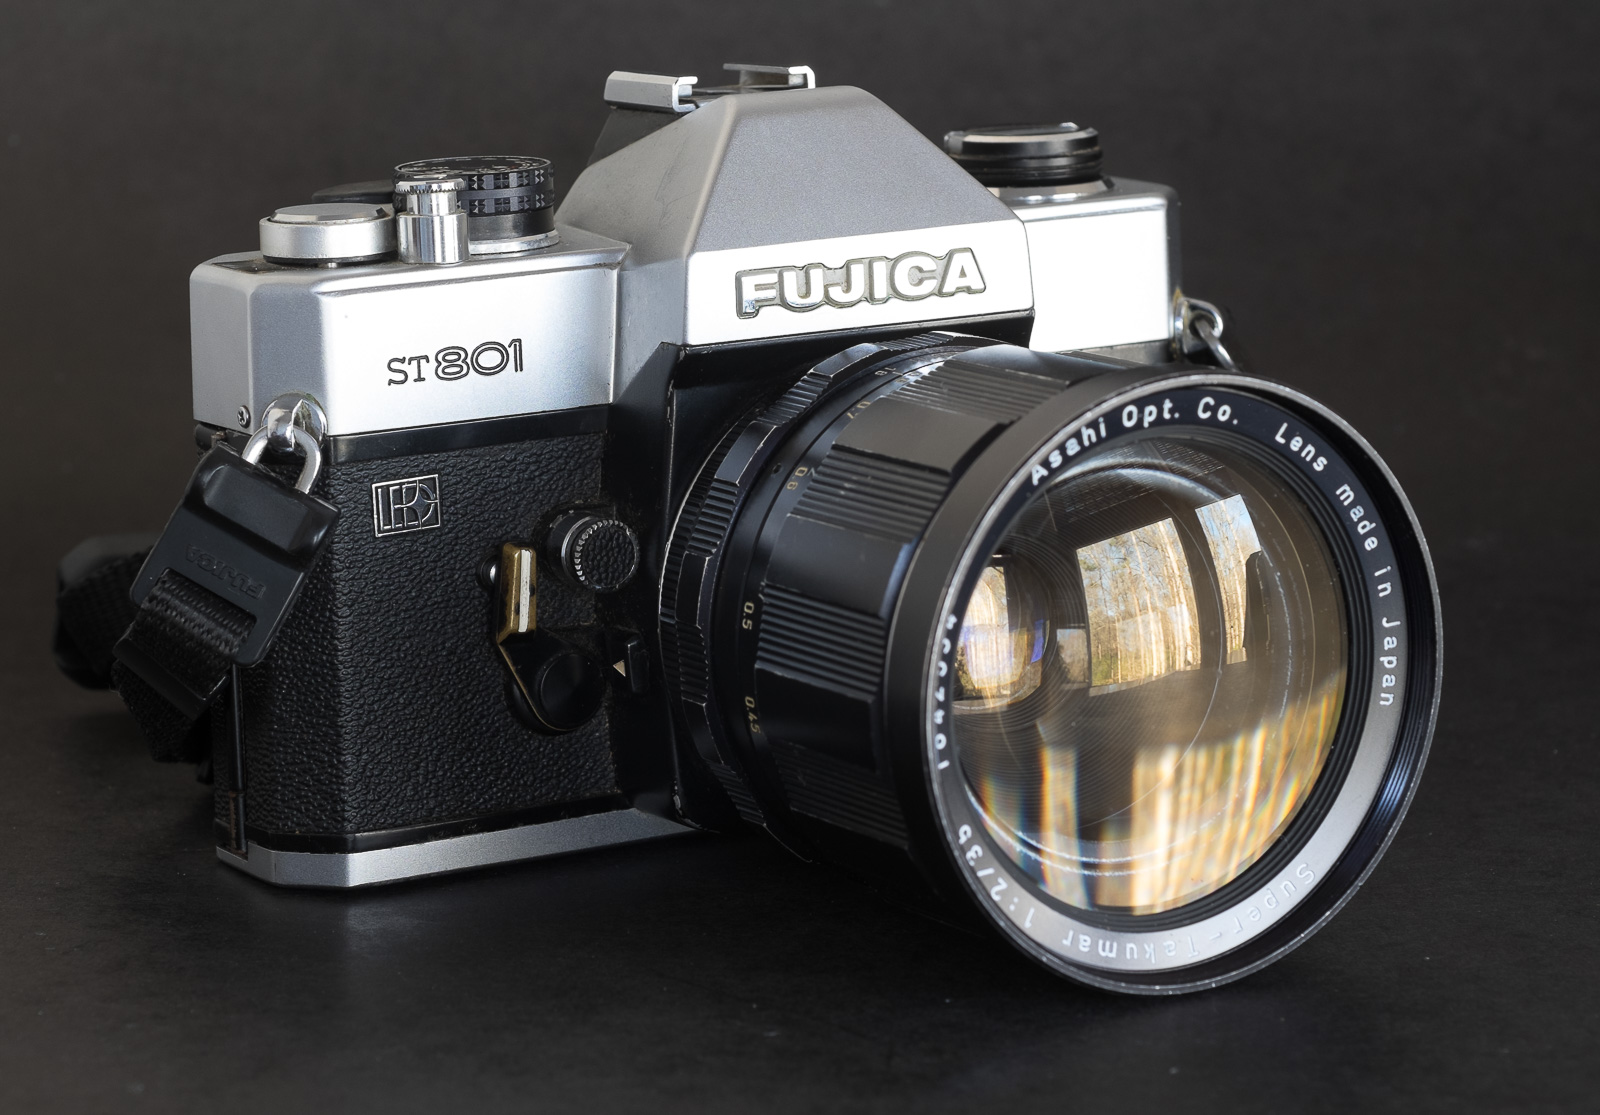 Fujica ST801 – CamerAgX – a new life for old gear